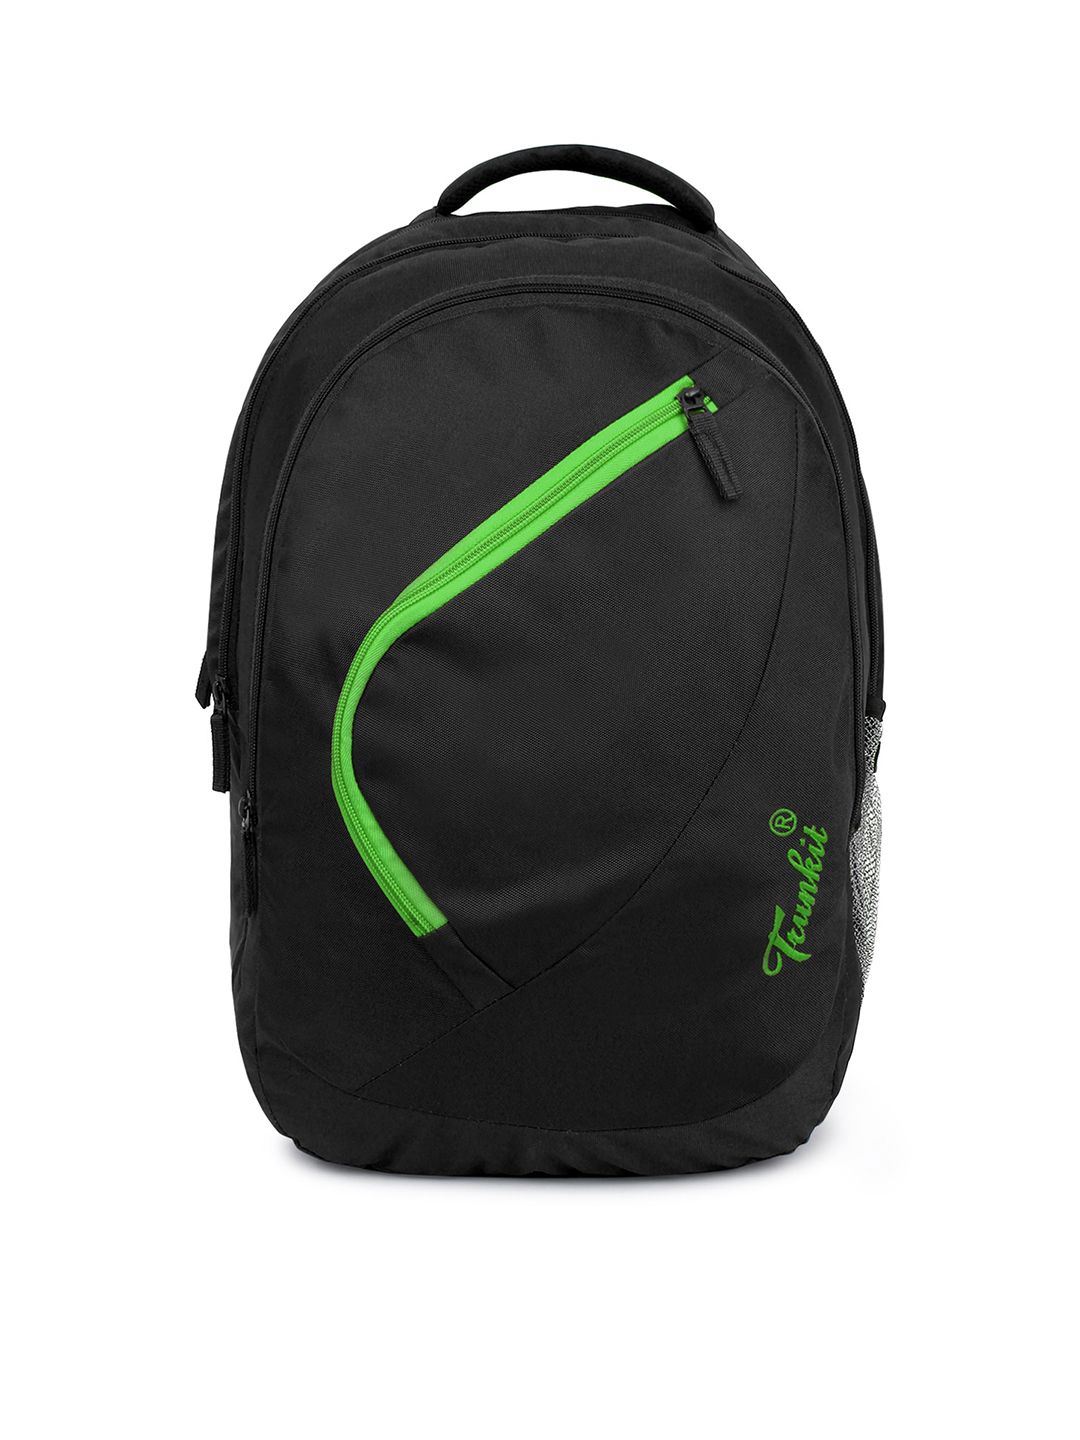 TRUNKIT Unisex Black Contrast Detail Laptop Backpack Price in India